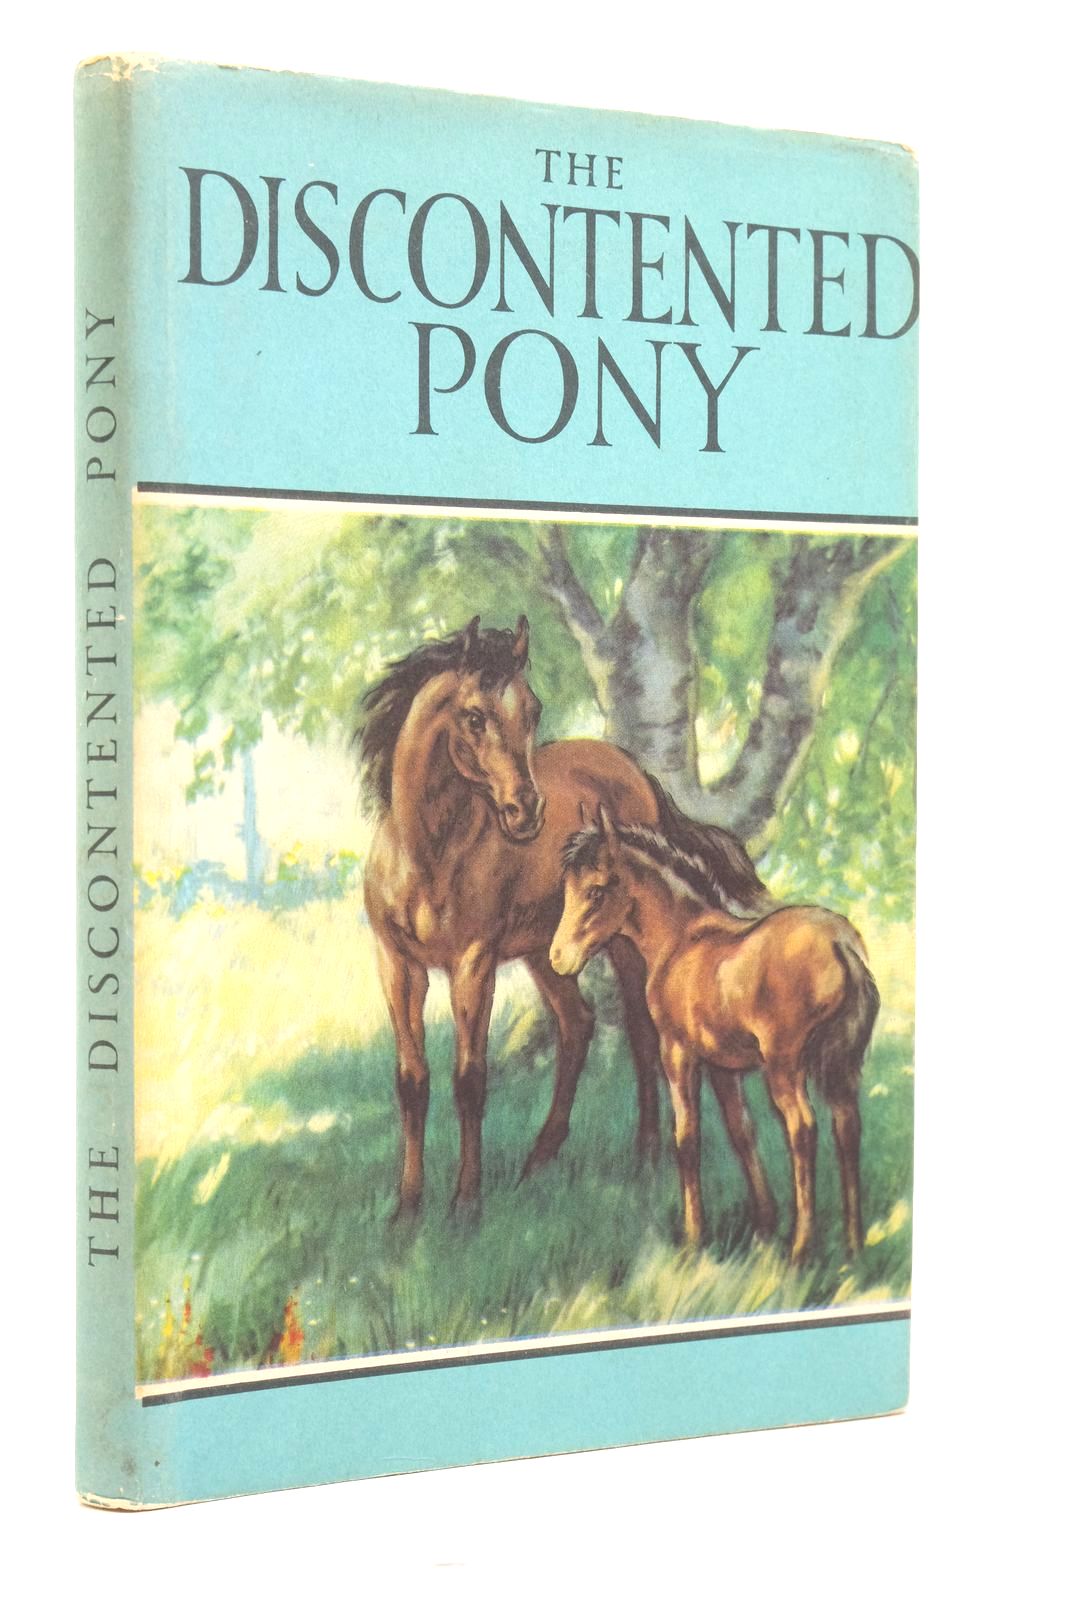 Photo of THE DISCONTENTED PONY written by Barr, Noel illustrated by Hickling, P.B. published by Wills &amp; Hepworth Ltd. (STOCK CODE: 2137447)  for sale by Stella & Rose's Books